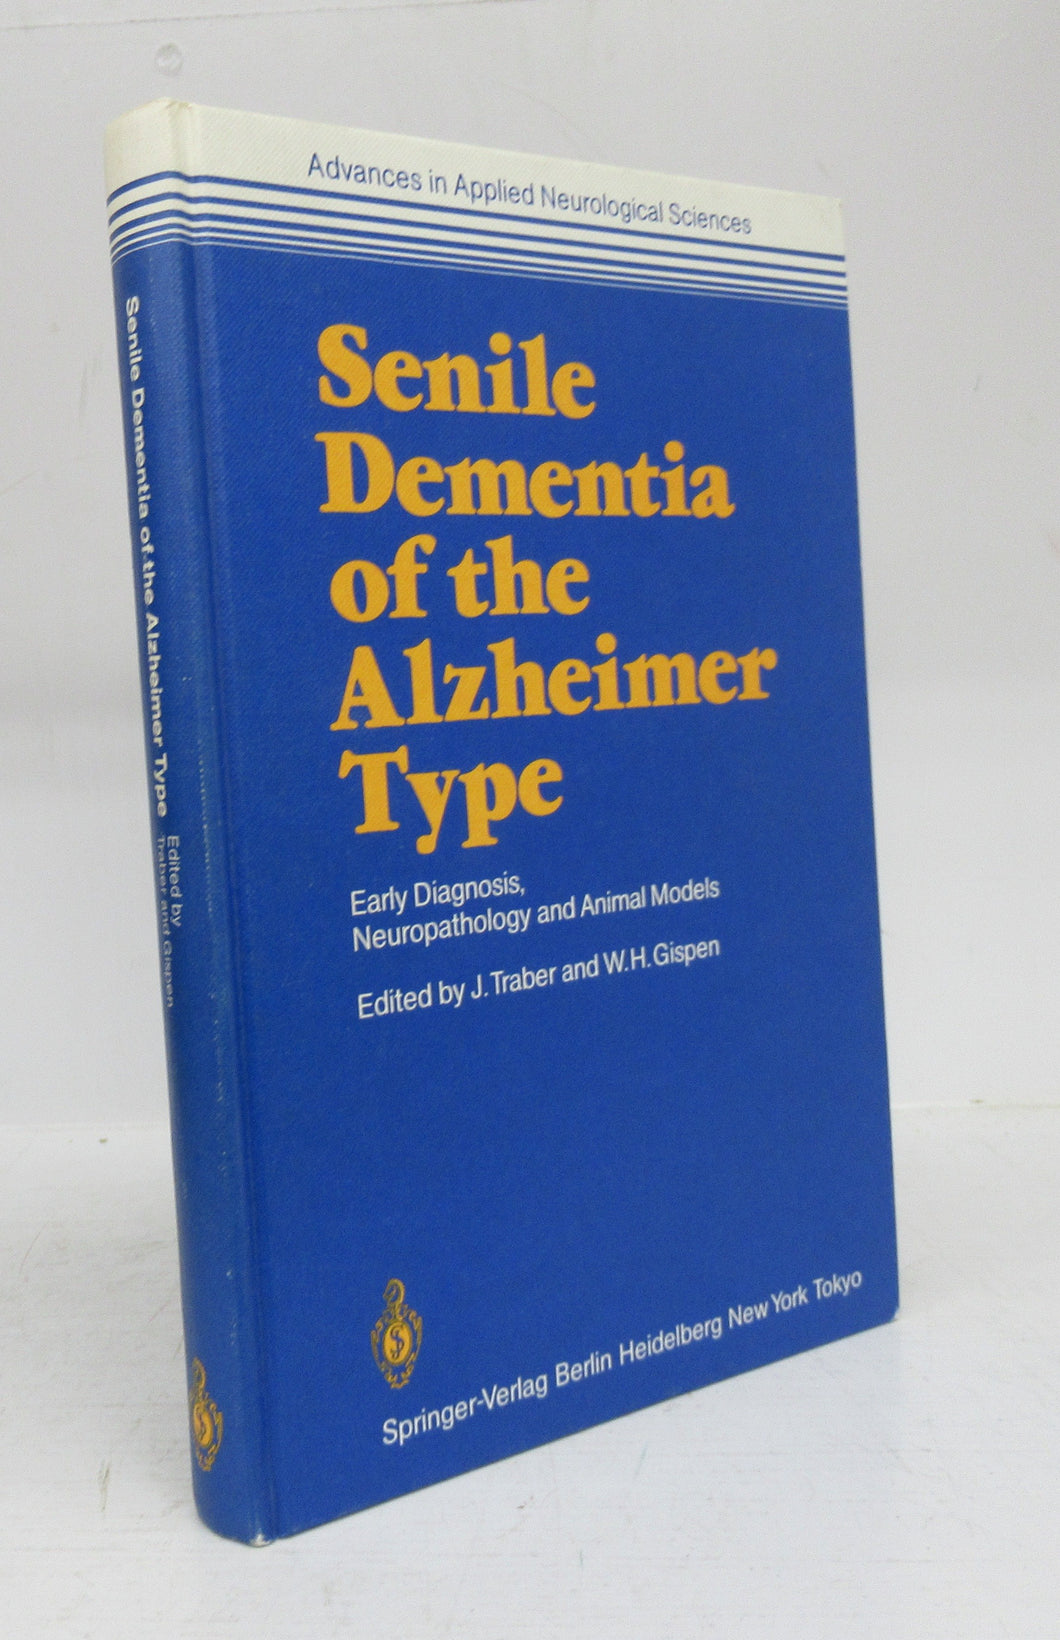 Senile Dementia of the Alzheimer Type: Early Diagnosis, Neuropathology and Animal Models